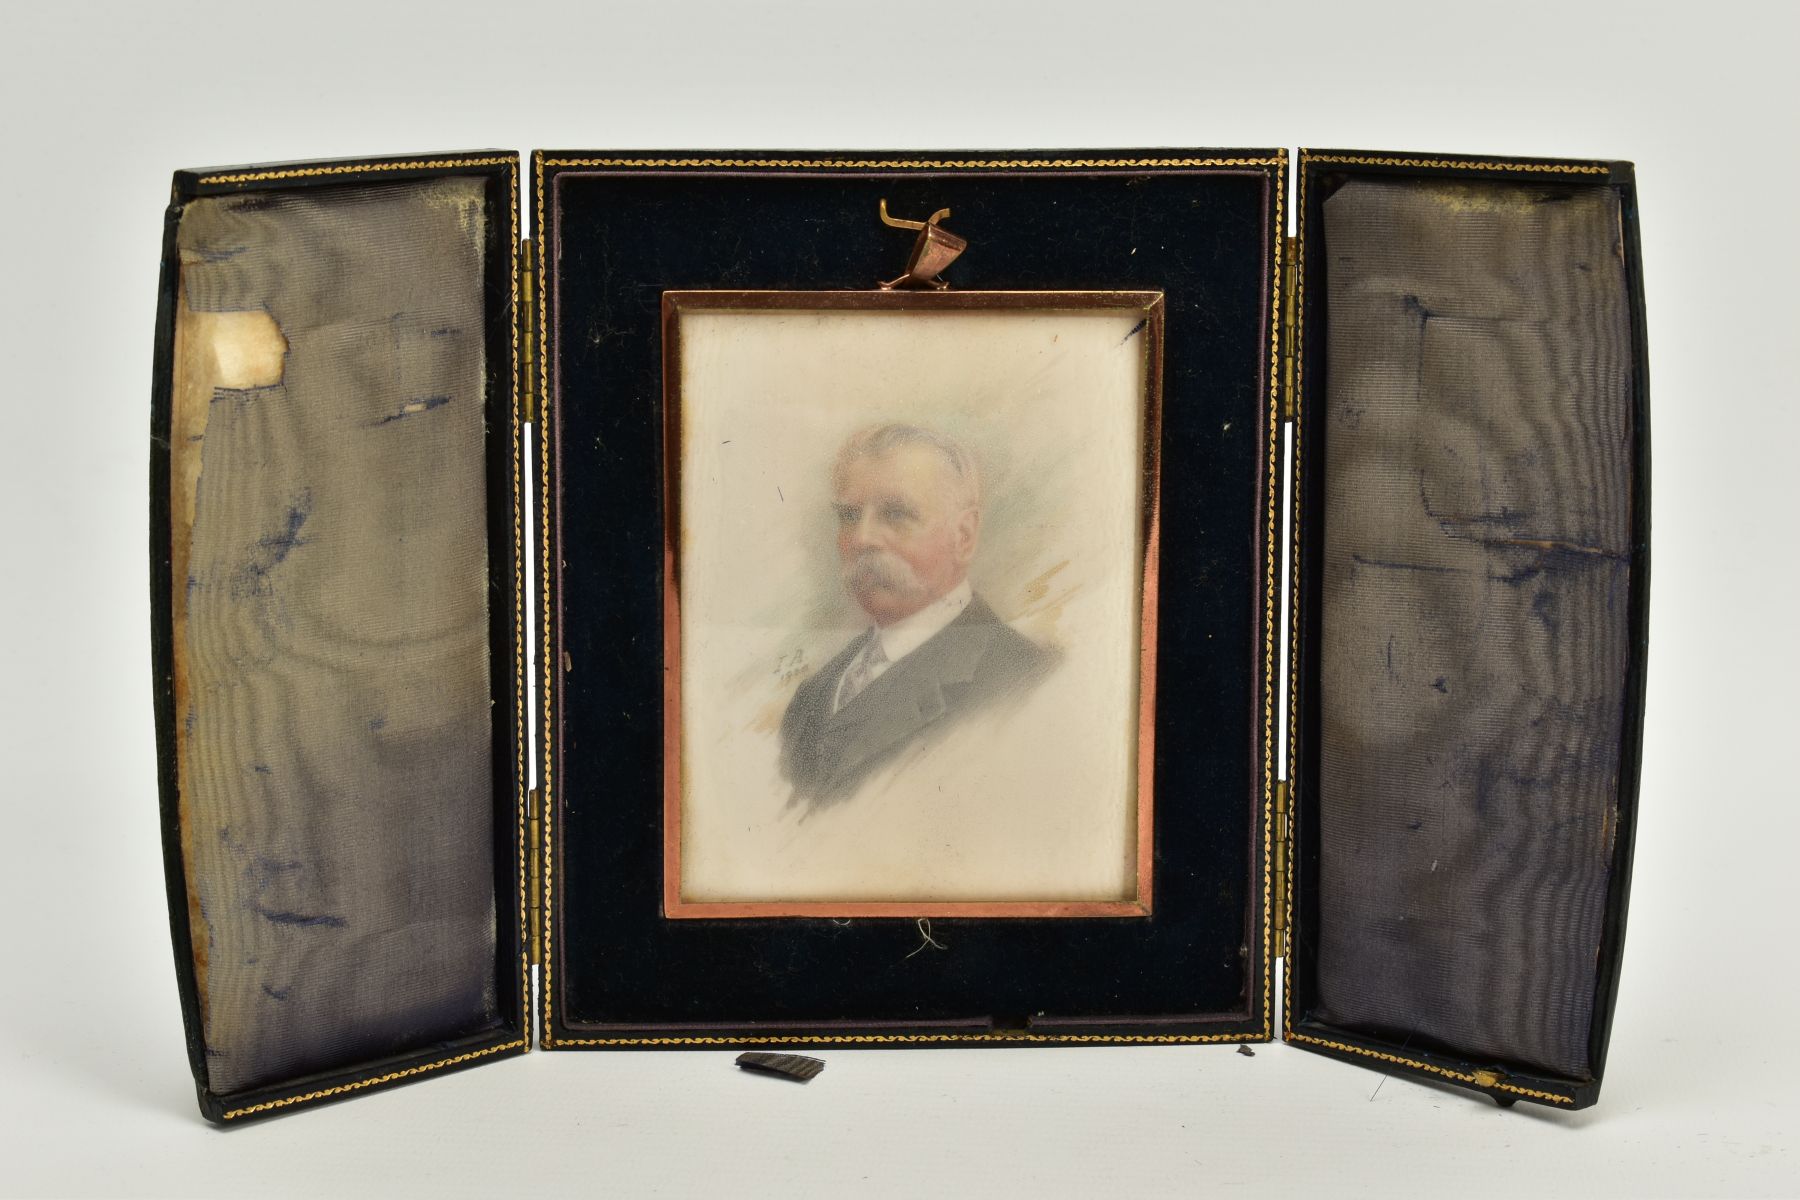 A CASED MINIATURE PORTRAIT, the blue and gold trim case, opens to reveal a miniature portrait of a